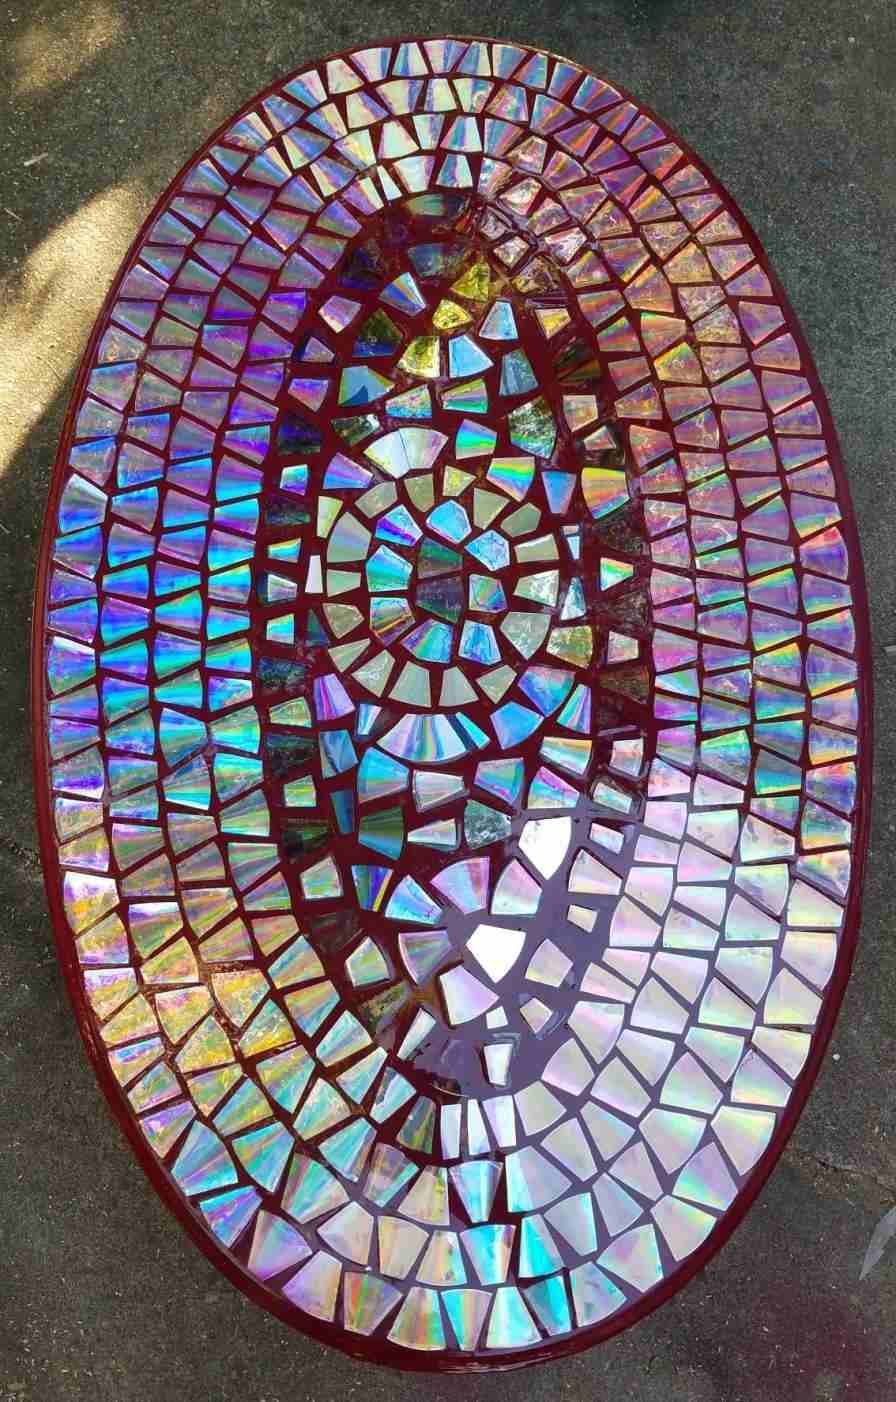 table designsrhhughcabotcom small mosaic resin outdoor side bottle cap with poured surface steps turesrhinstructablescom ethan end patio drink cooler west elm mid century tripod